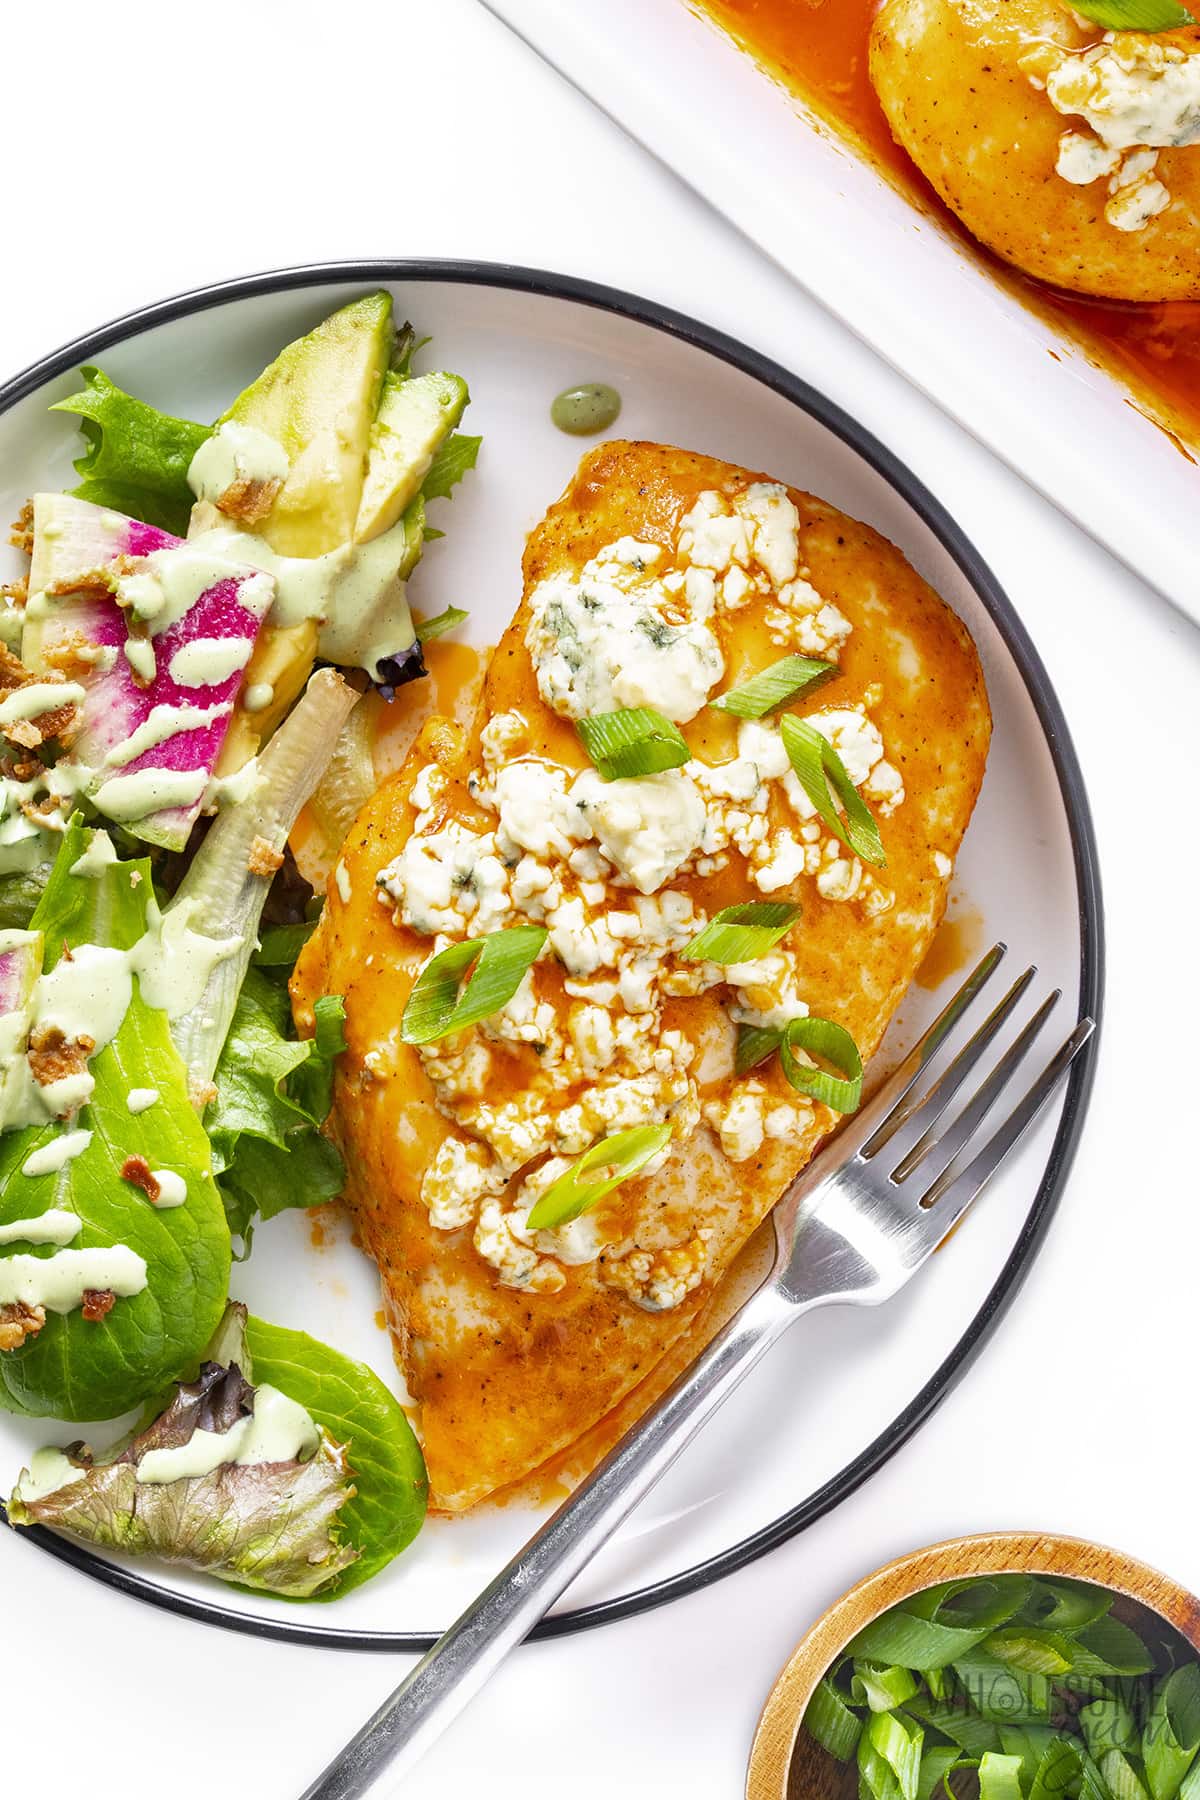 Baked buffalo chicken breast on a plate with green goddess salad.